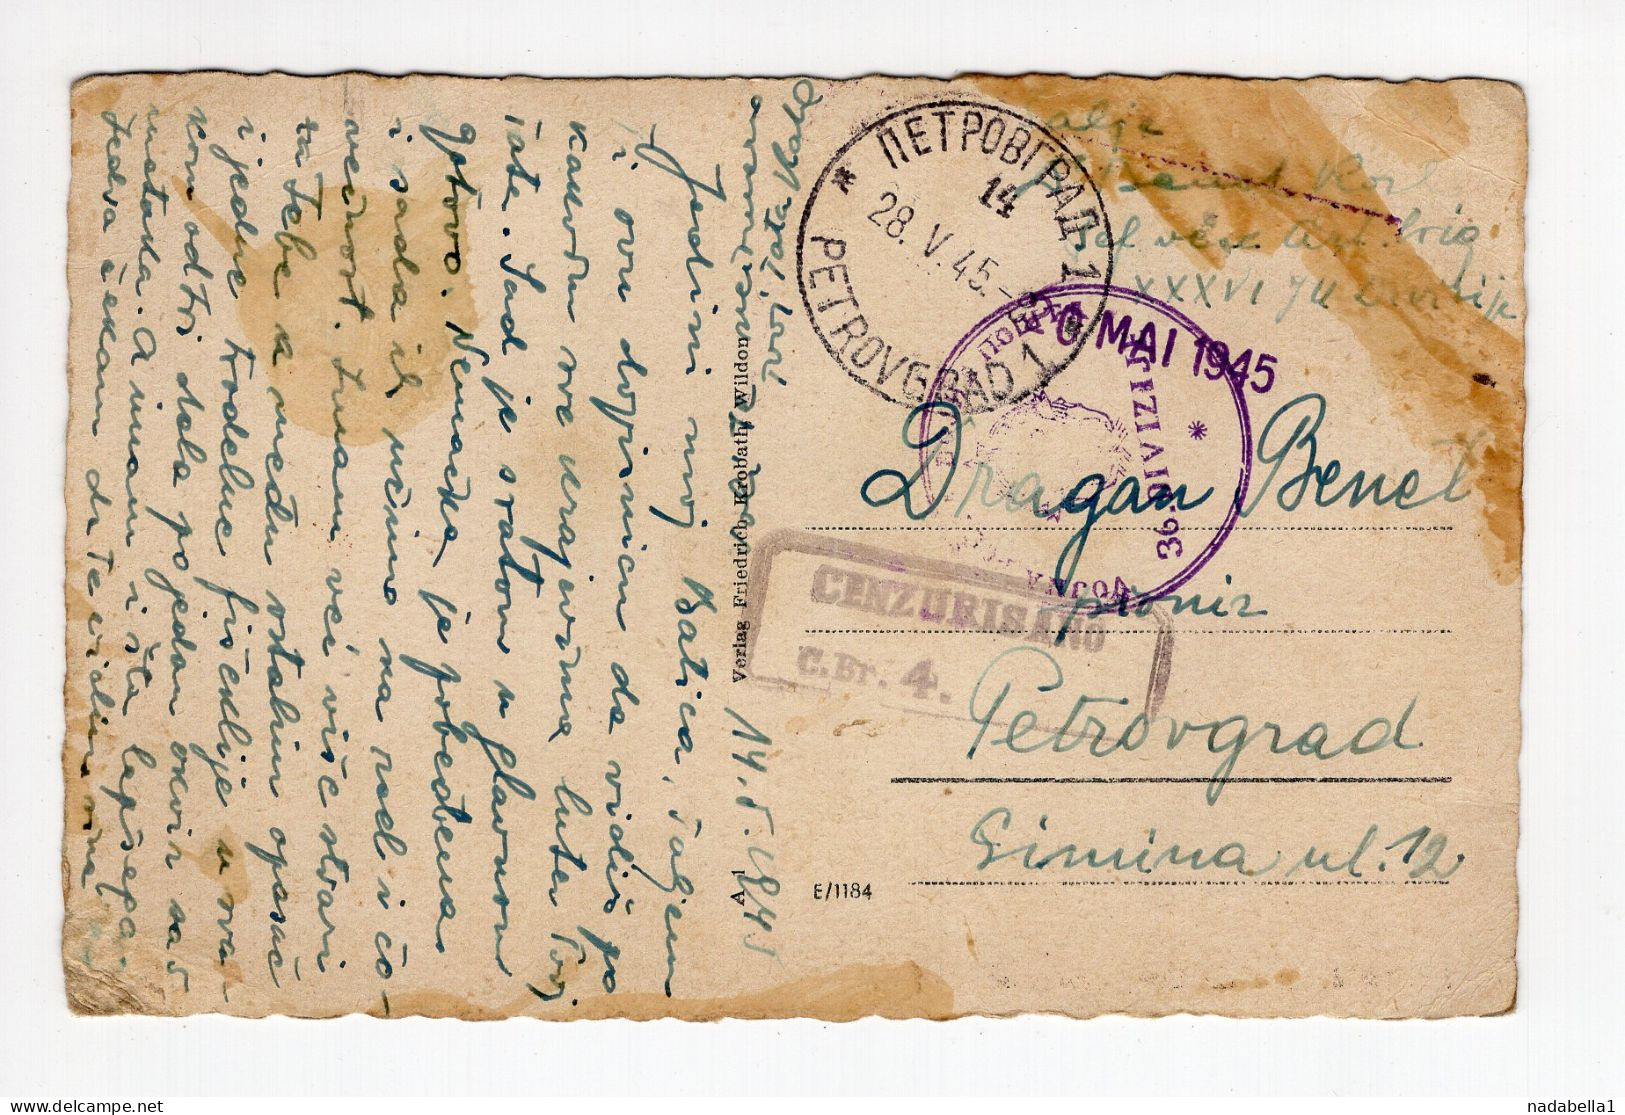 14.5.1945. YUGOSLAVIA,MILITARY,PARTIZAN MAIL,CENSOR,36 DIVISION,FROM FRONT LINE,AUSTRIA? TO SERBIA,POSTCARD,USED - Briefe U. Dokumente